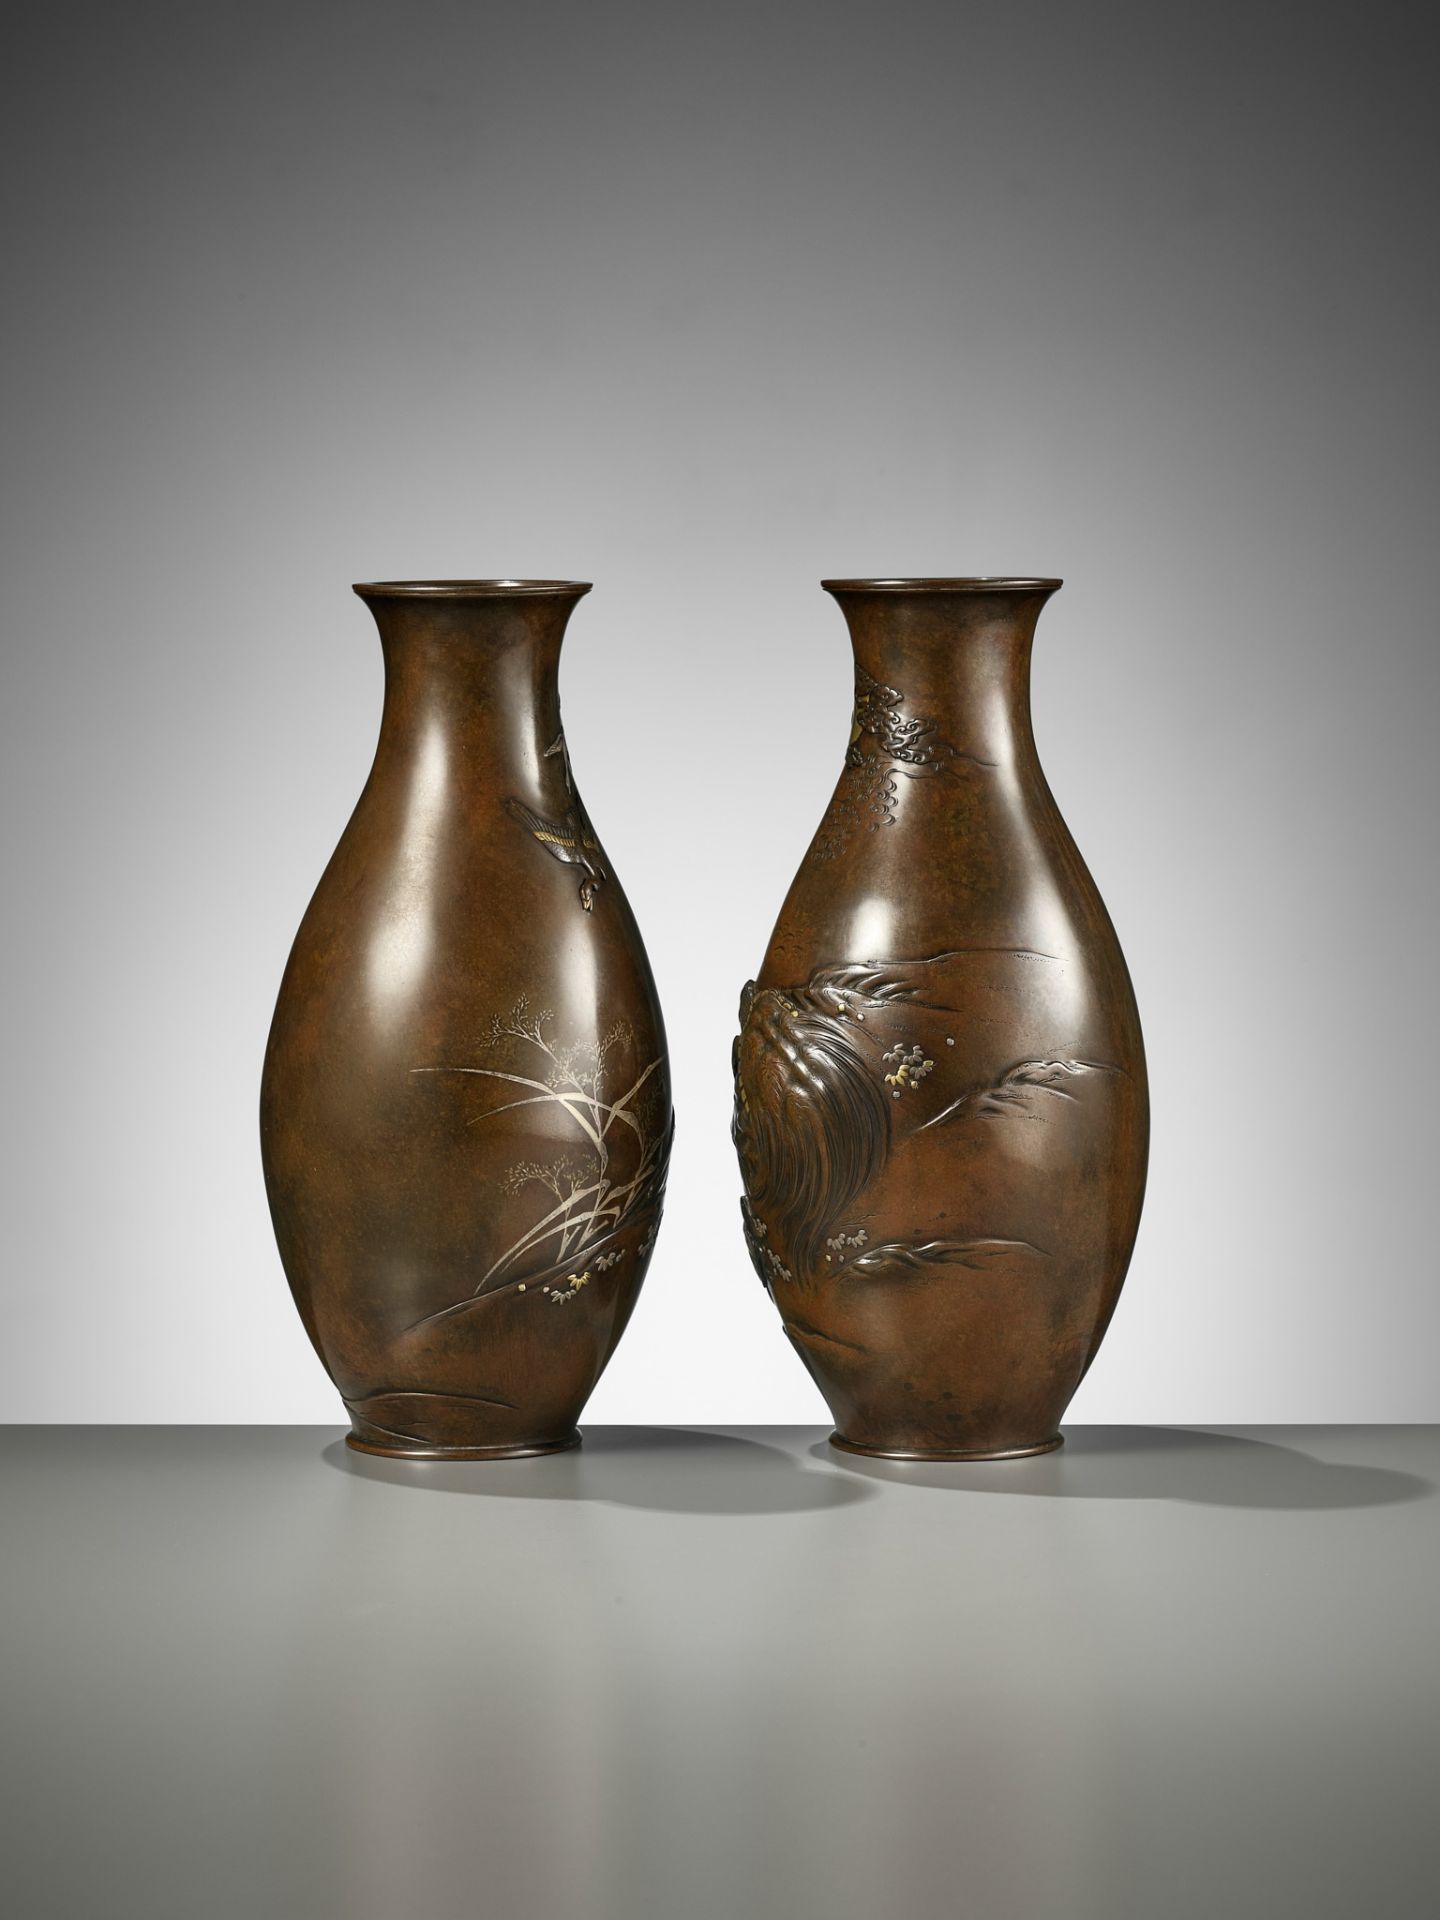 CHOMIN: A SUPERB PAIR OF INLAID BRONZE VASES WITH MINOGAME AND GEESE - Image 5 of 12